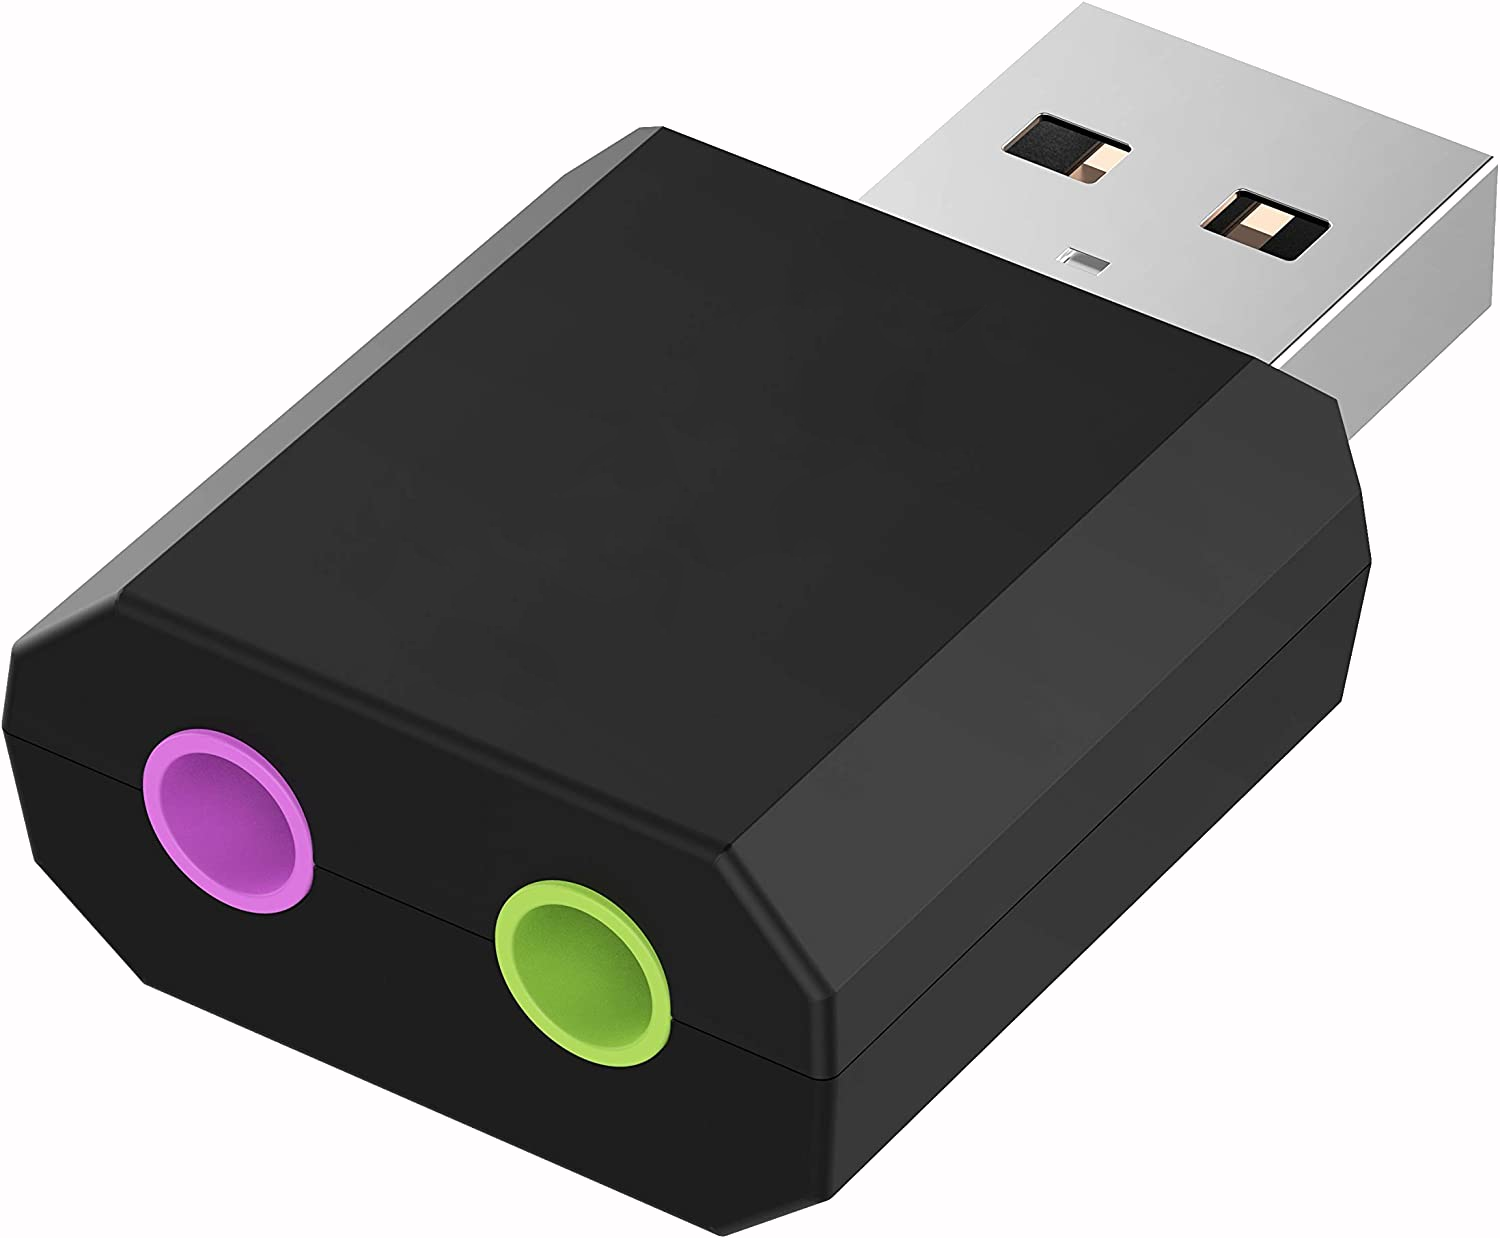 Usb pnp sound device drivers for mac